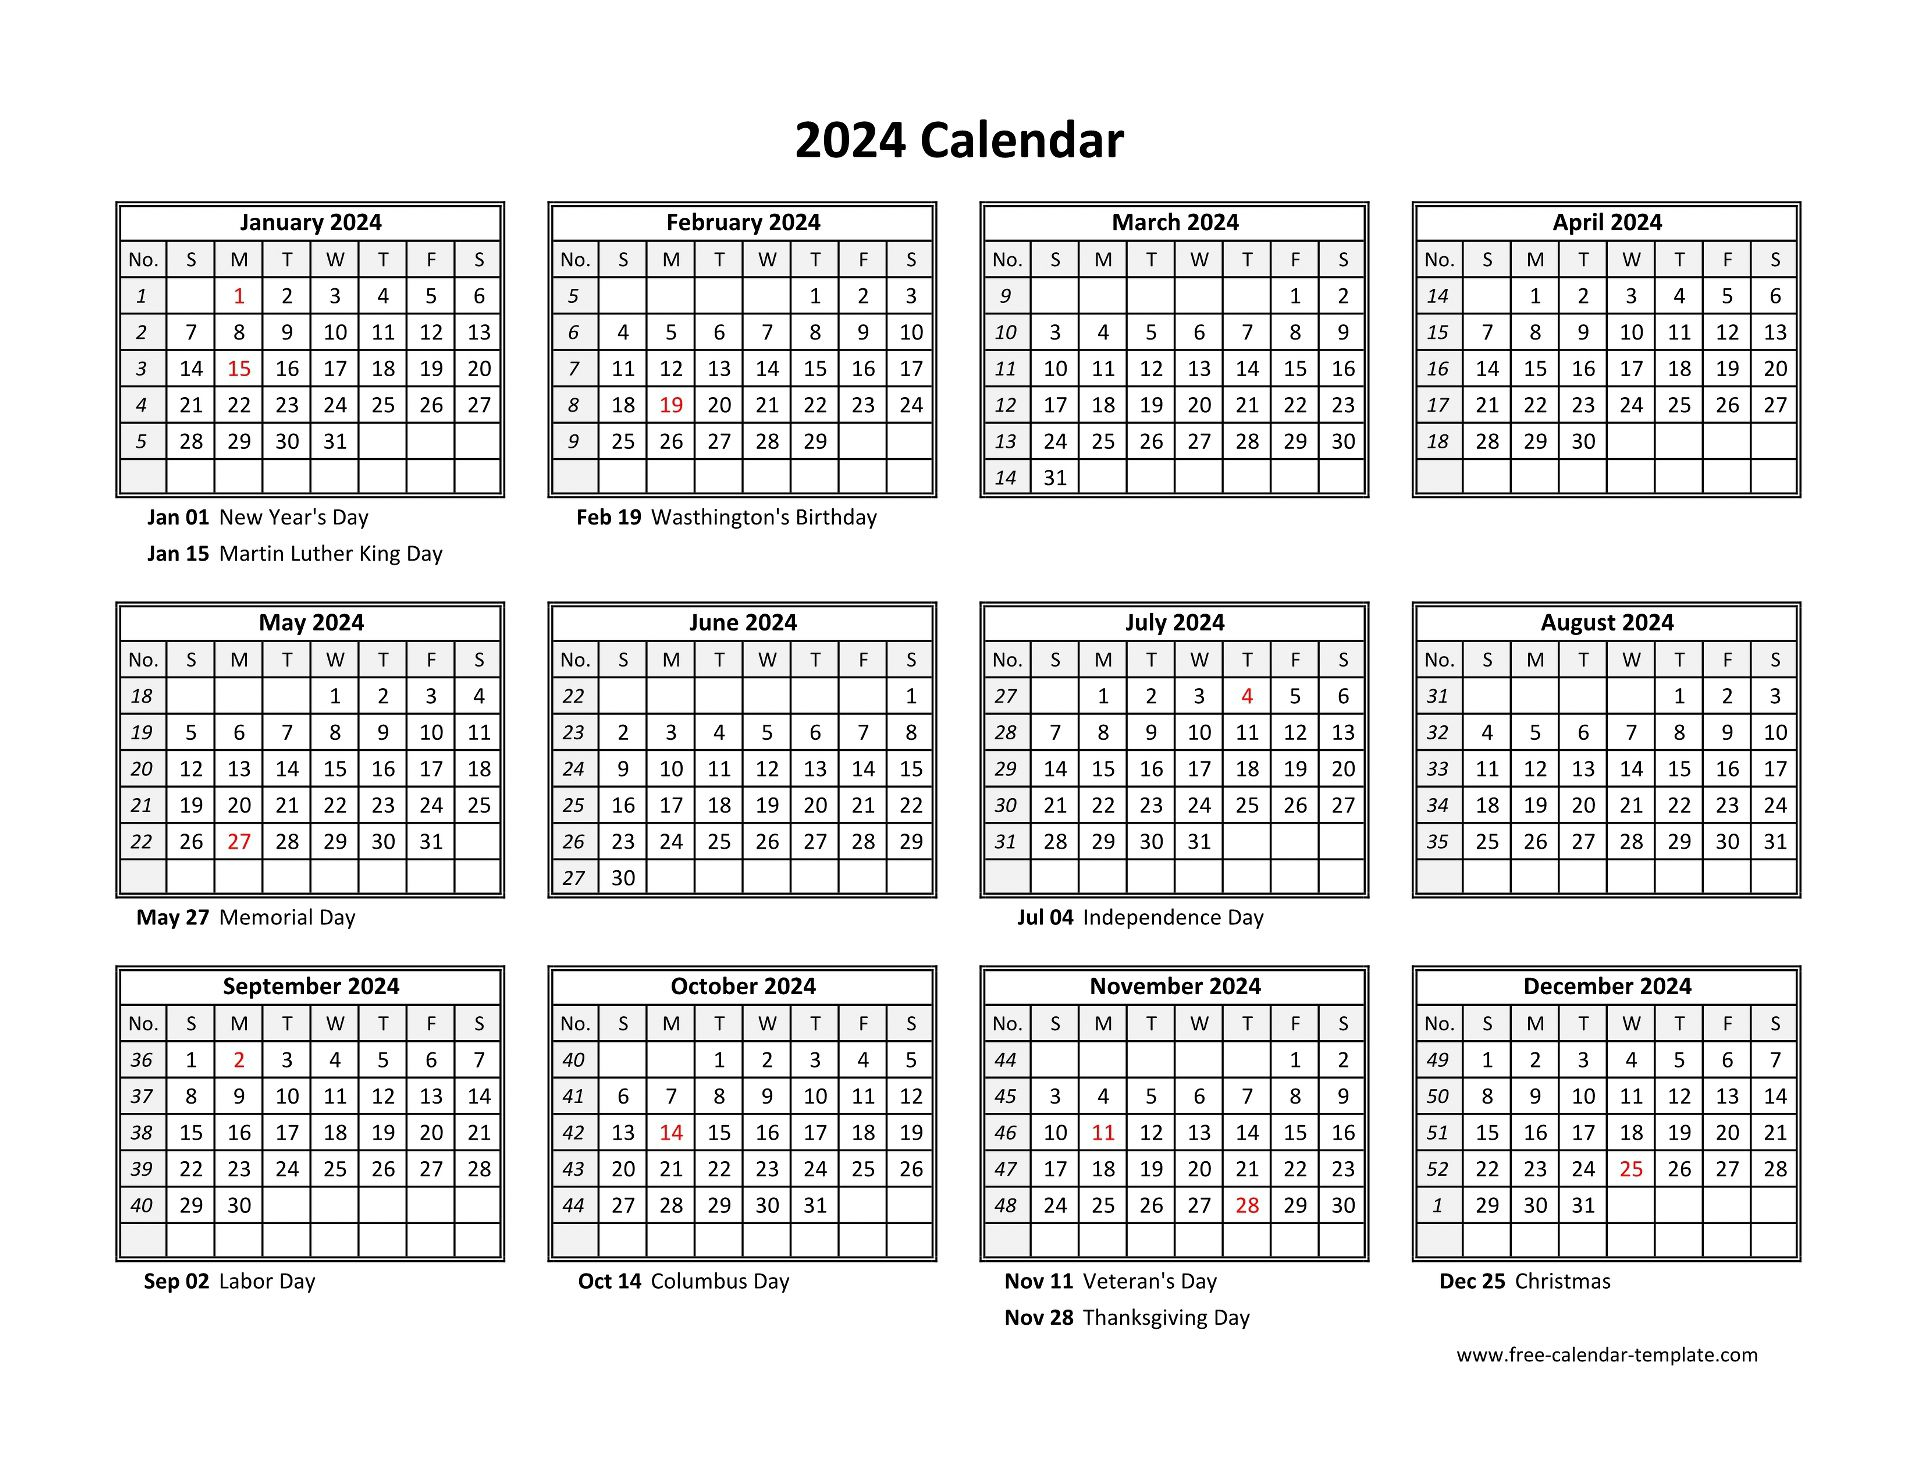 Printable Yearly Calendar 2024 | Free-Calendar-Template for Printable 2024 Calendar With Holidays And Observances